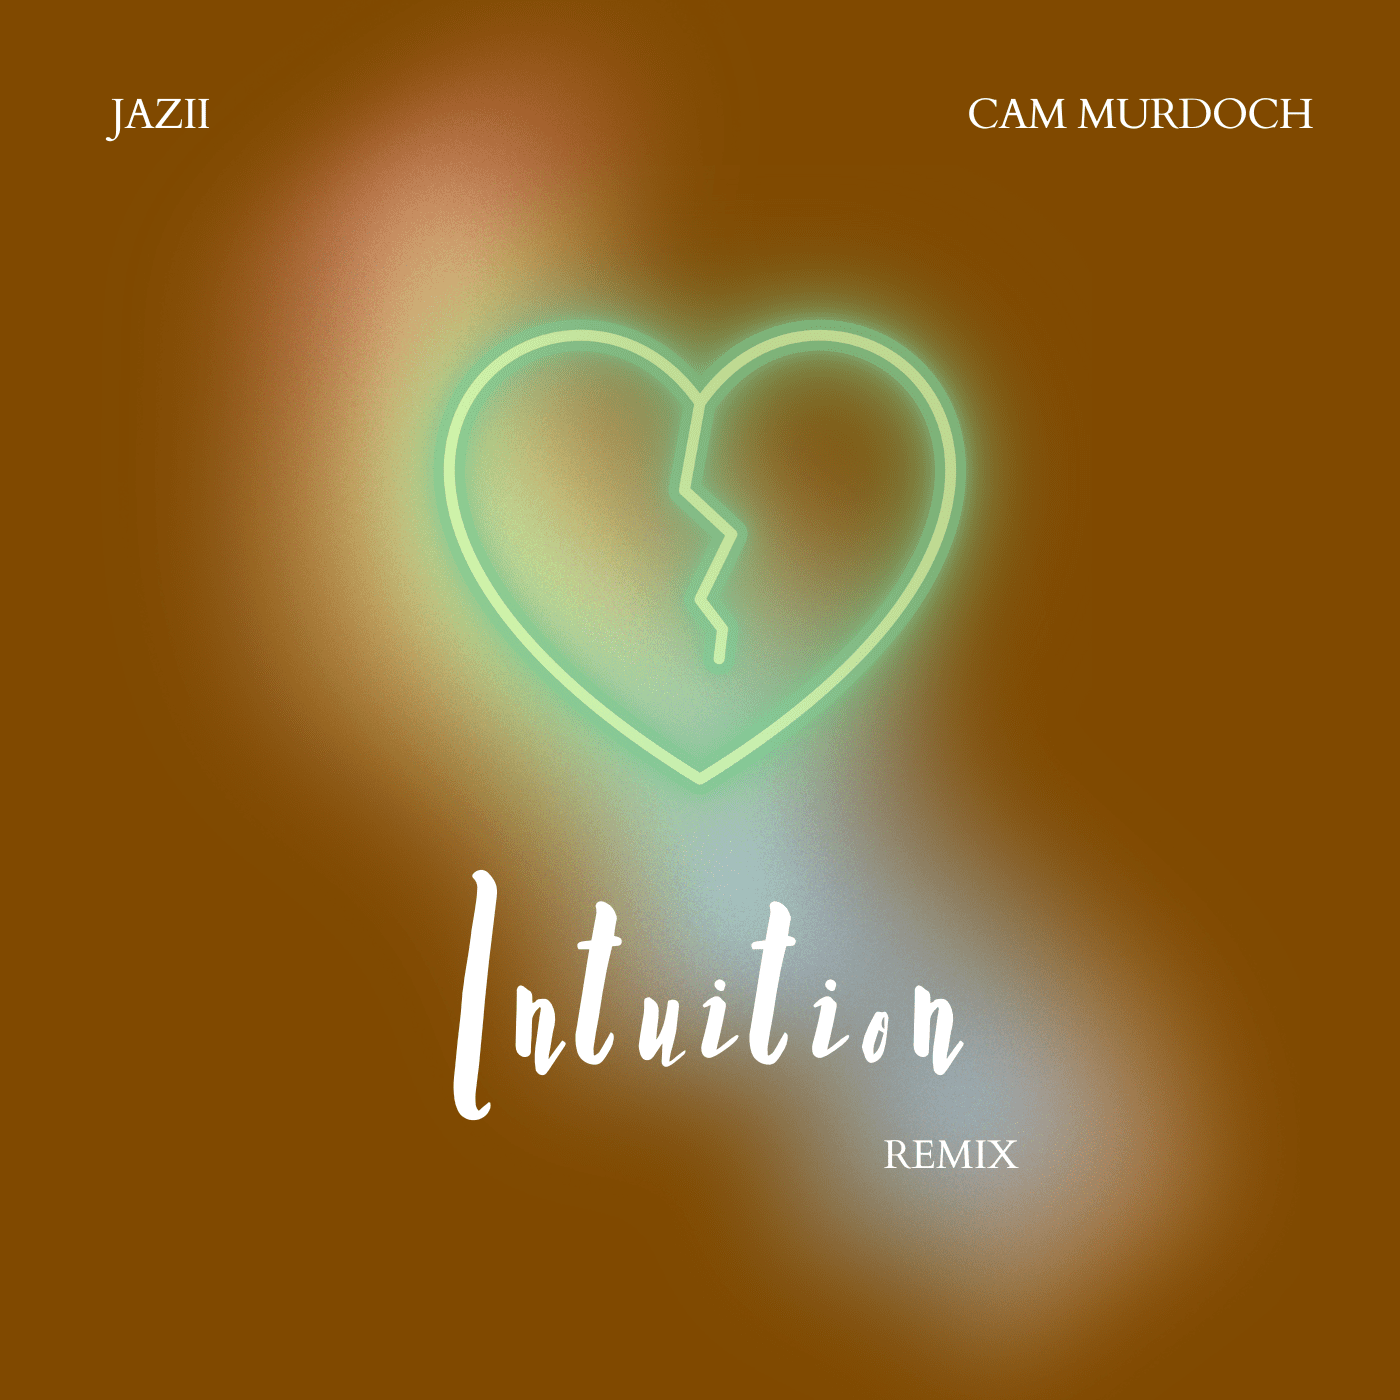 Cover art for Intuition Remix ft. Cam Murdoch by Jazii